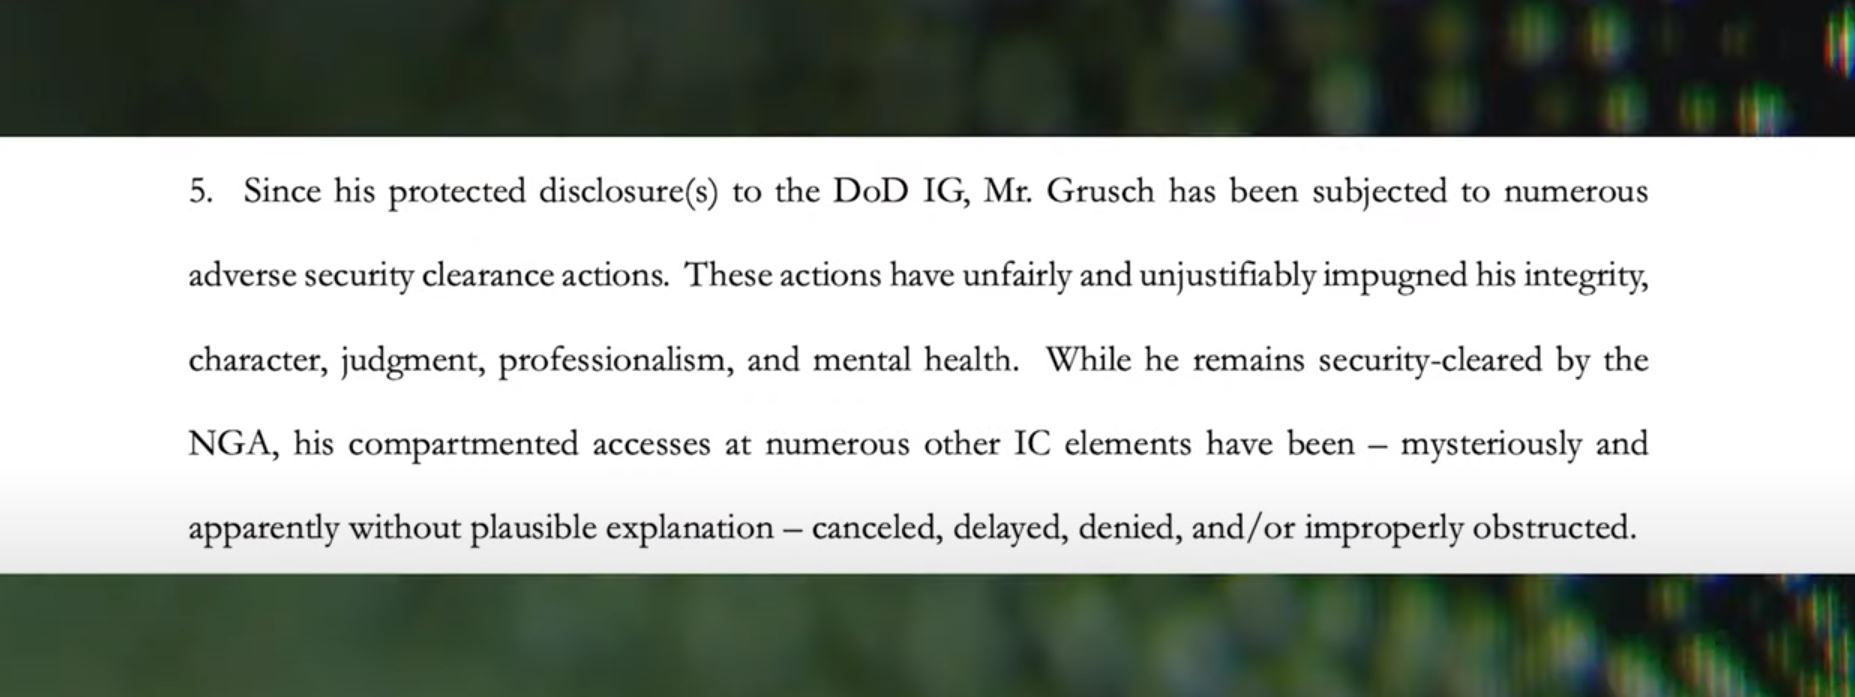 In the above excerpt, an official document states that after revealing the information to the US Department of Defense, Grusch began to face backlash in his work.